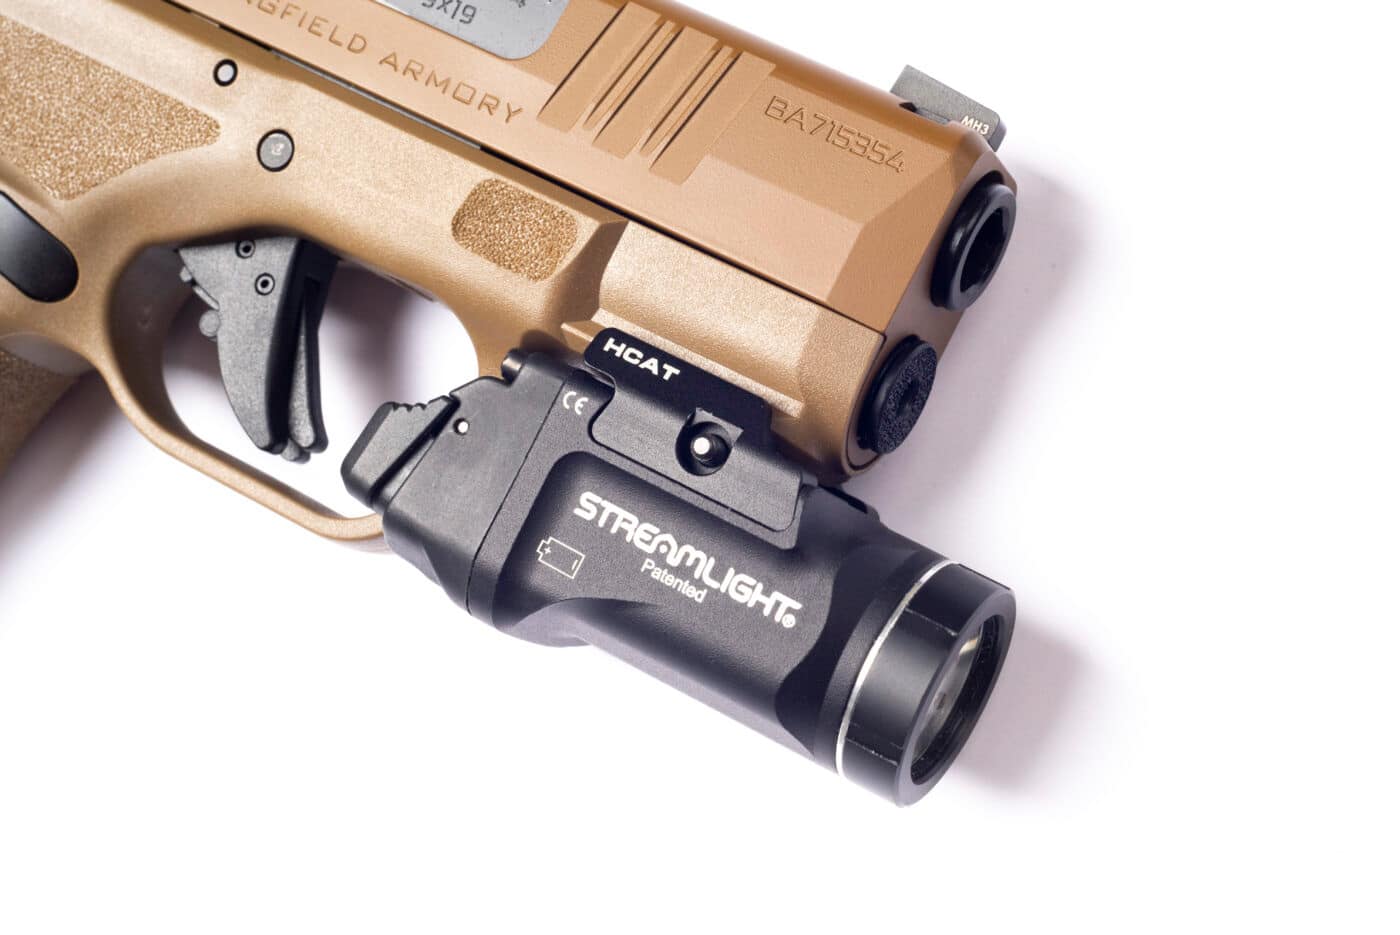 Testing of the Streamlight TLR-7 Sub mounted to Hellcat pistol